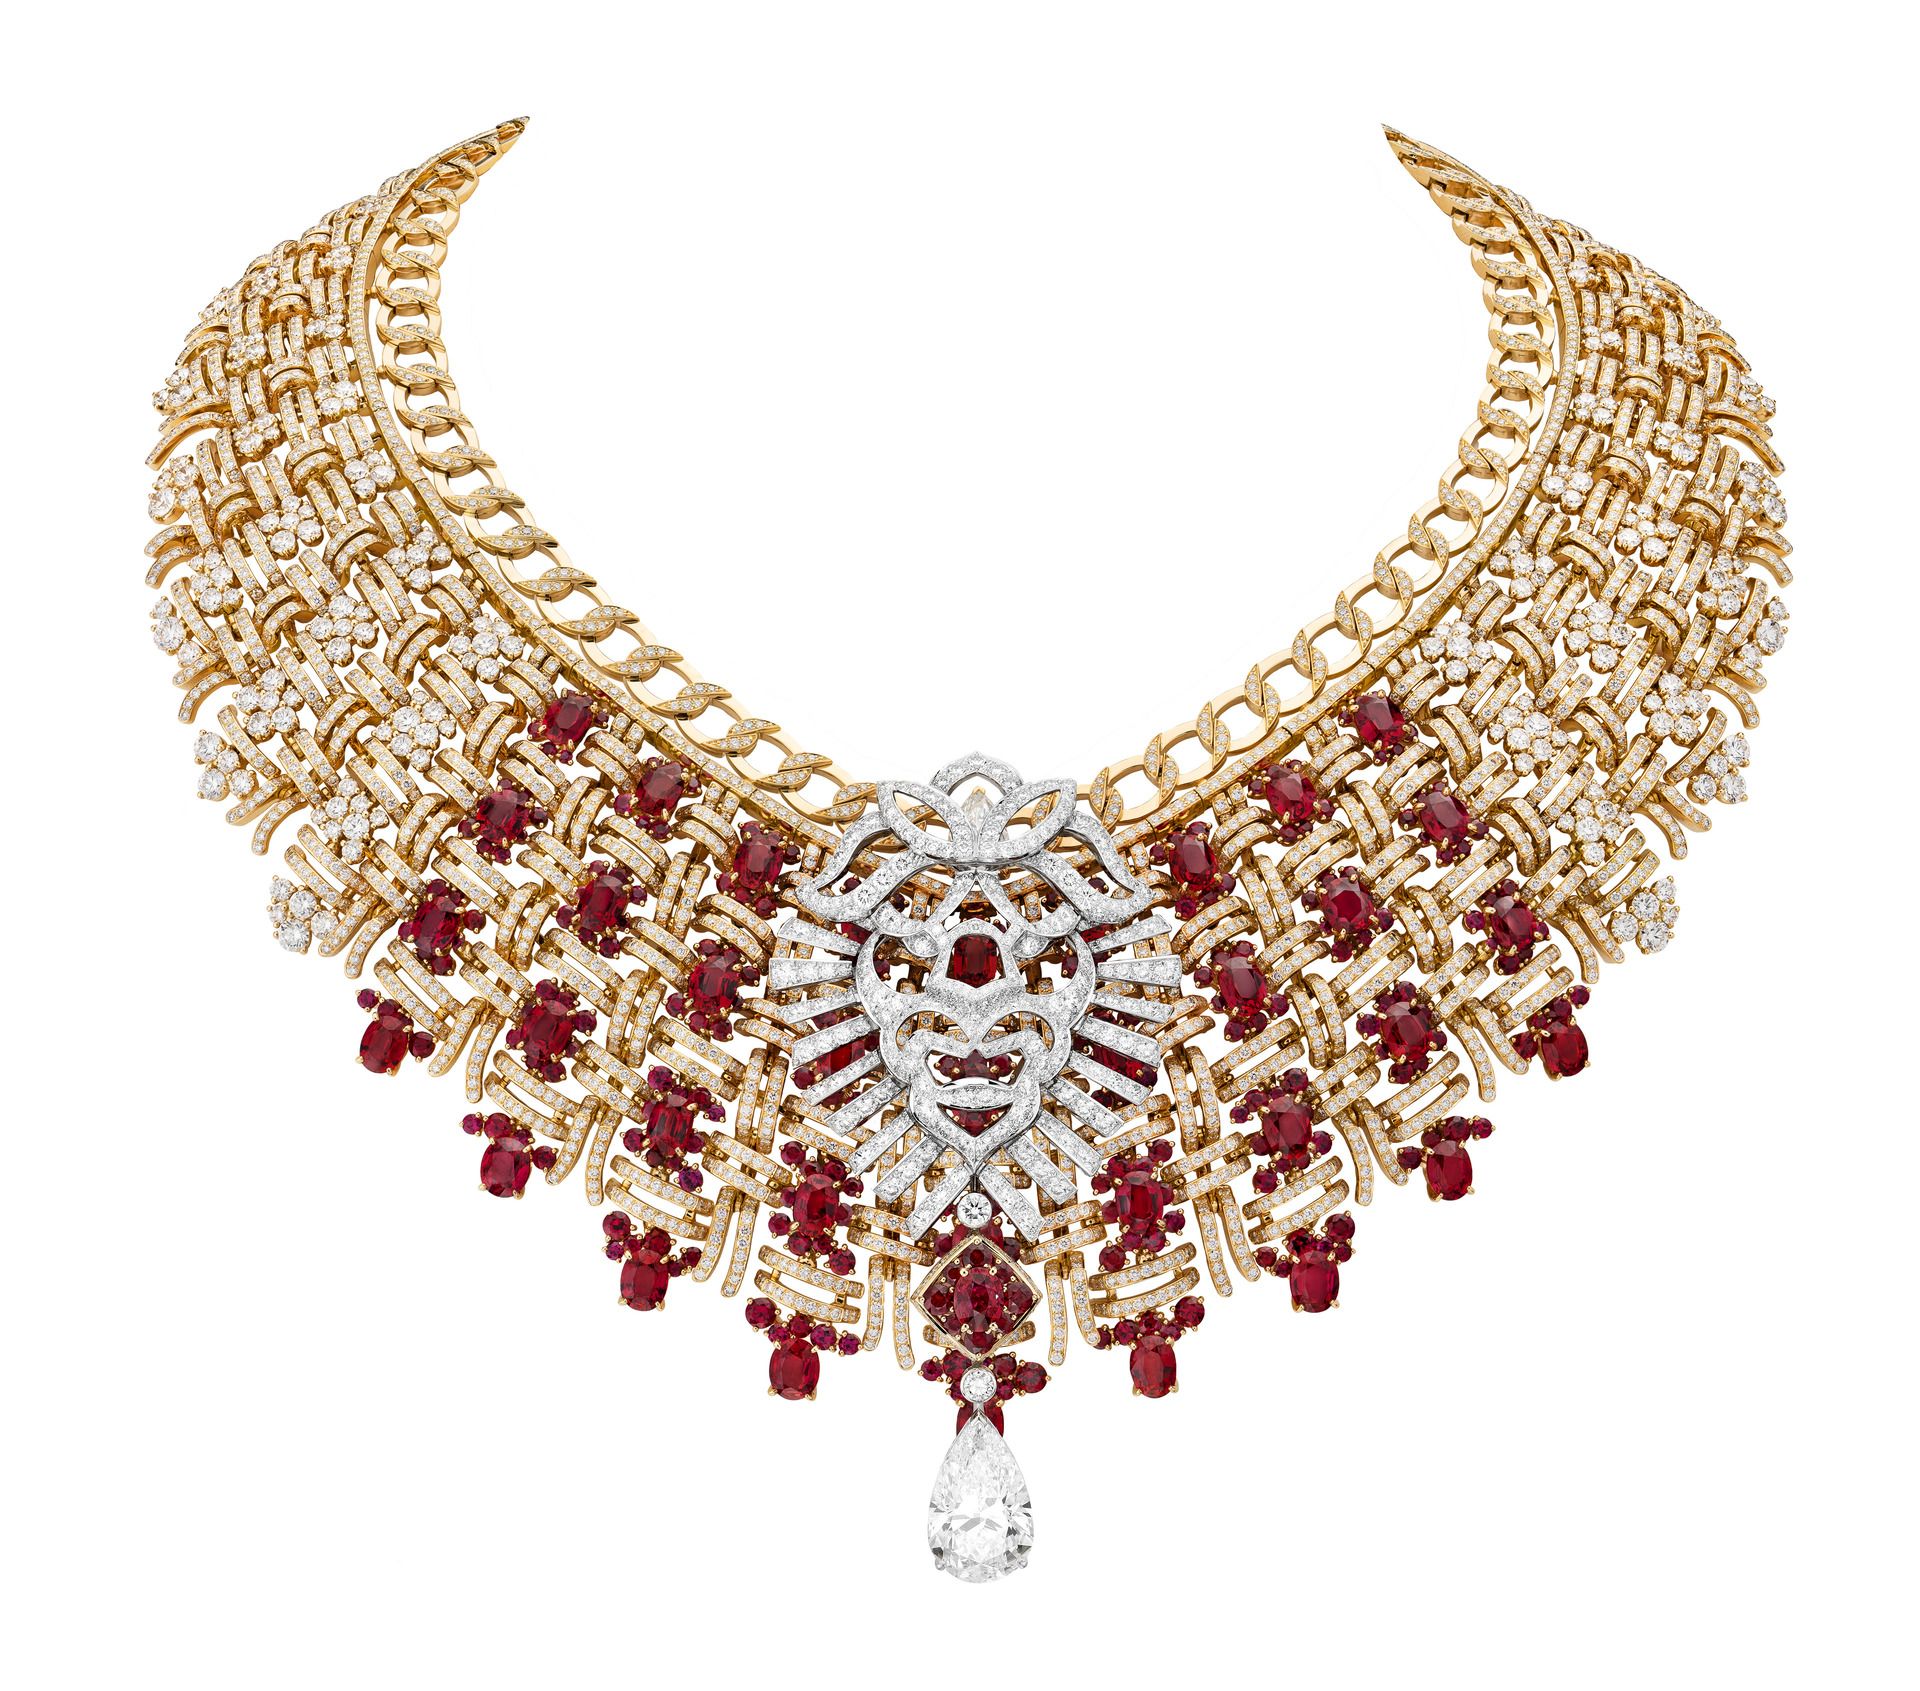 Artful Fashion — Louis Vuitton High Jewelry Collection 2022;